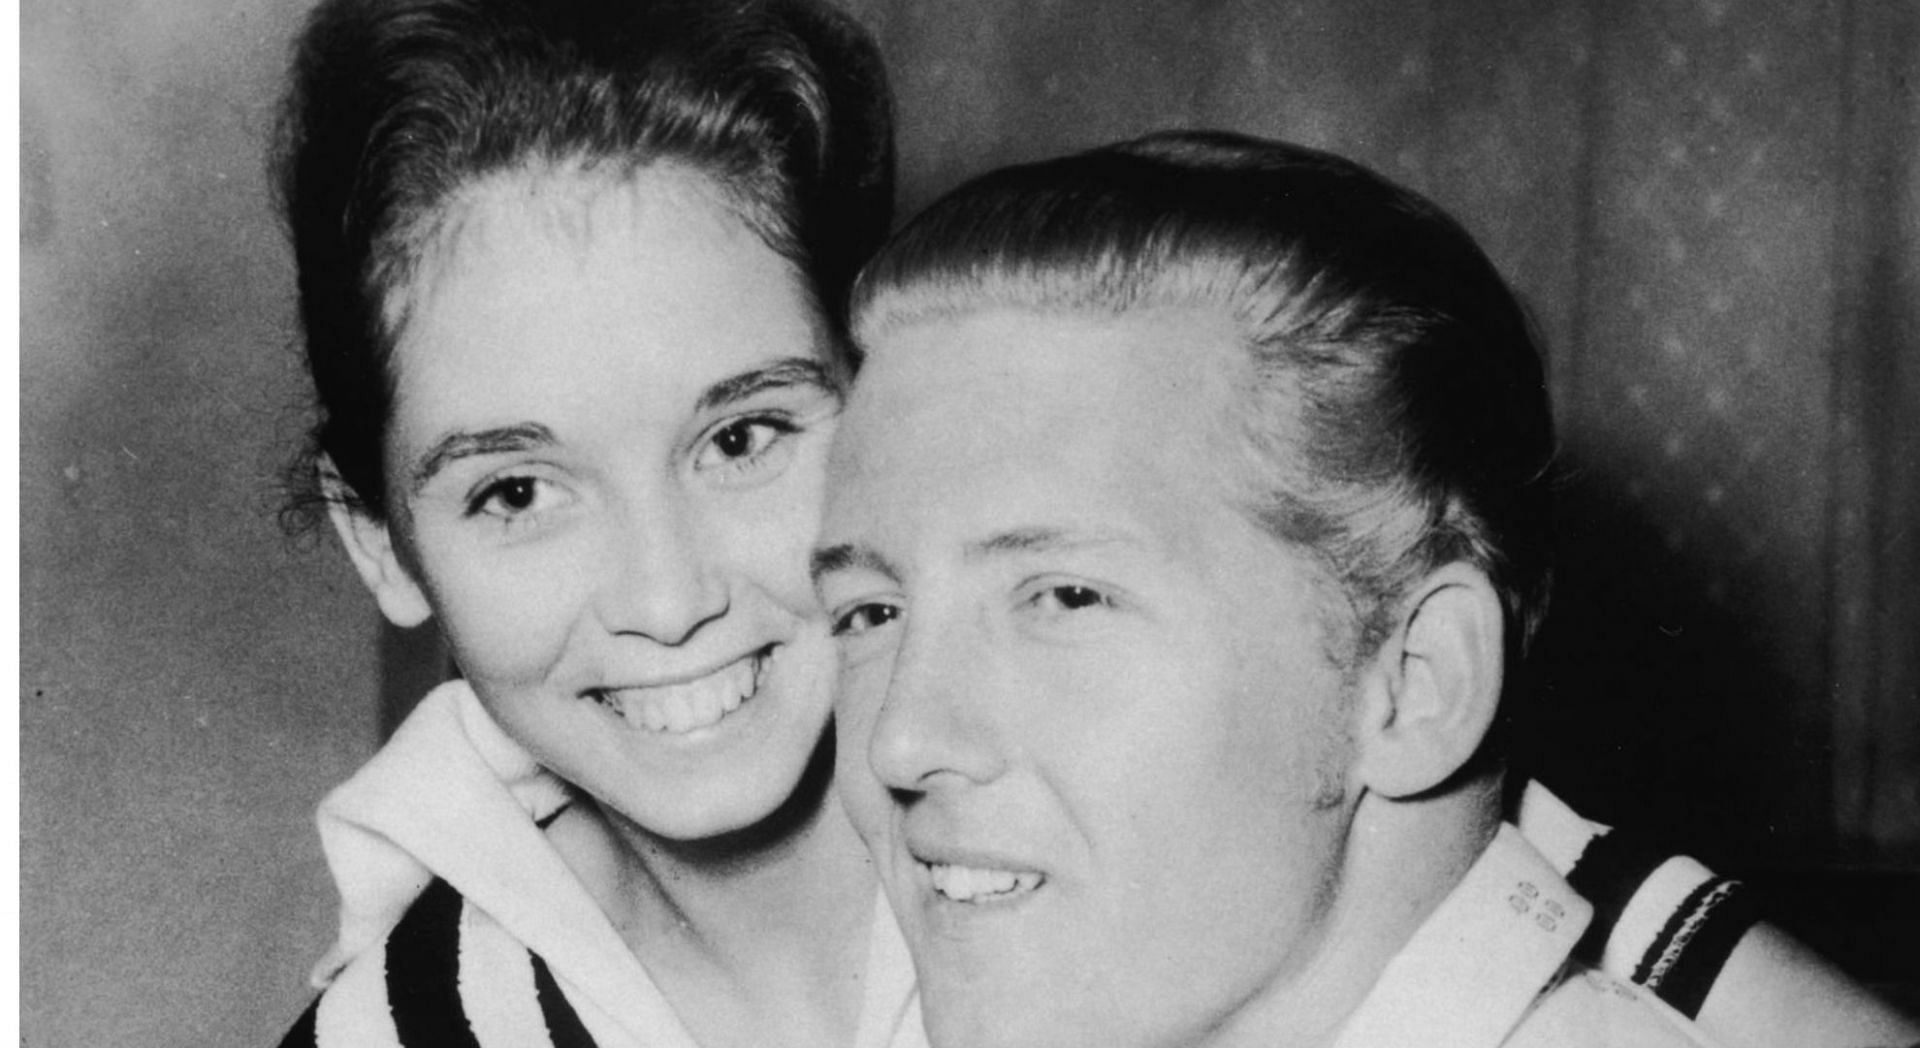 Jerry Lee Lewis&#039; career came to standstill after he married his 13-year-old cousin Myra (Image via Getty Images)